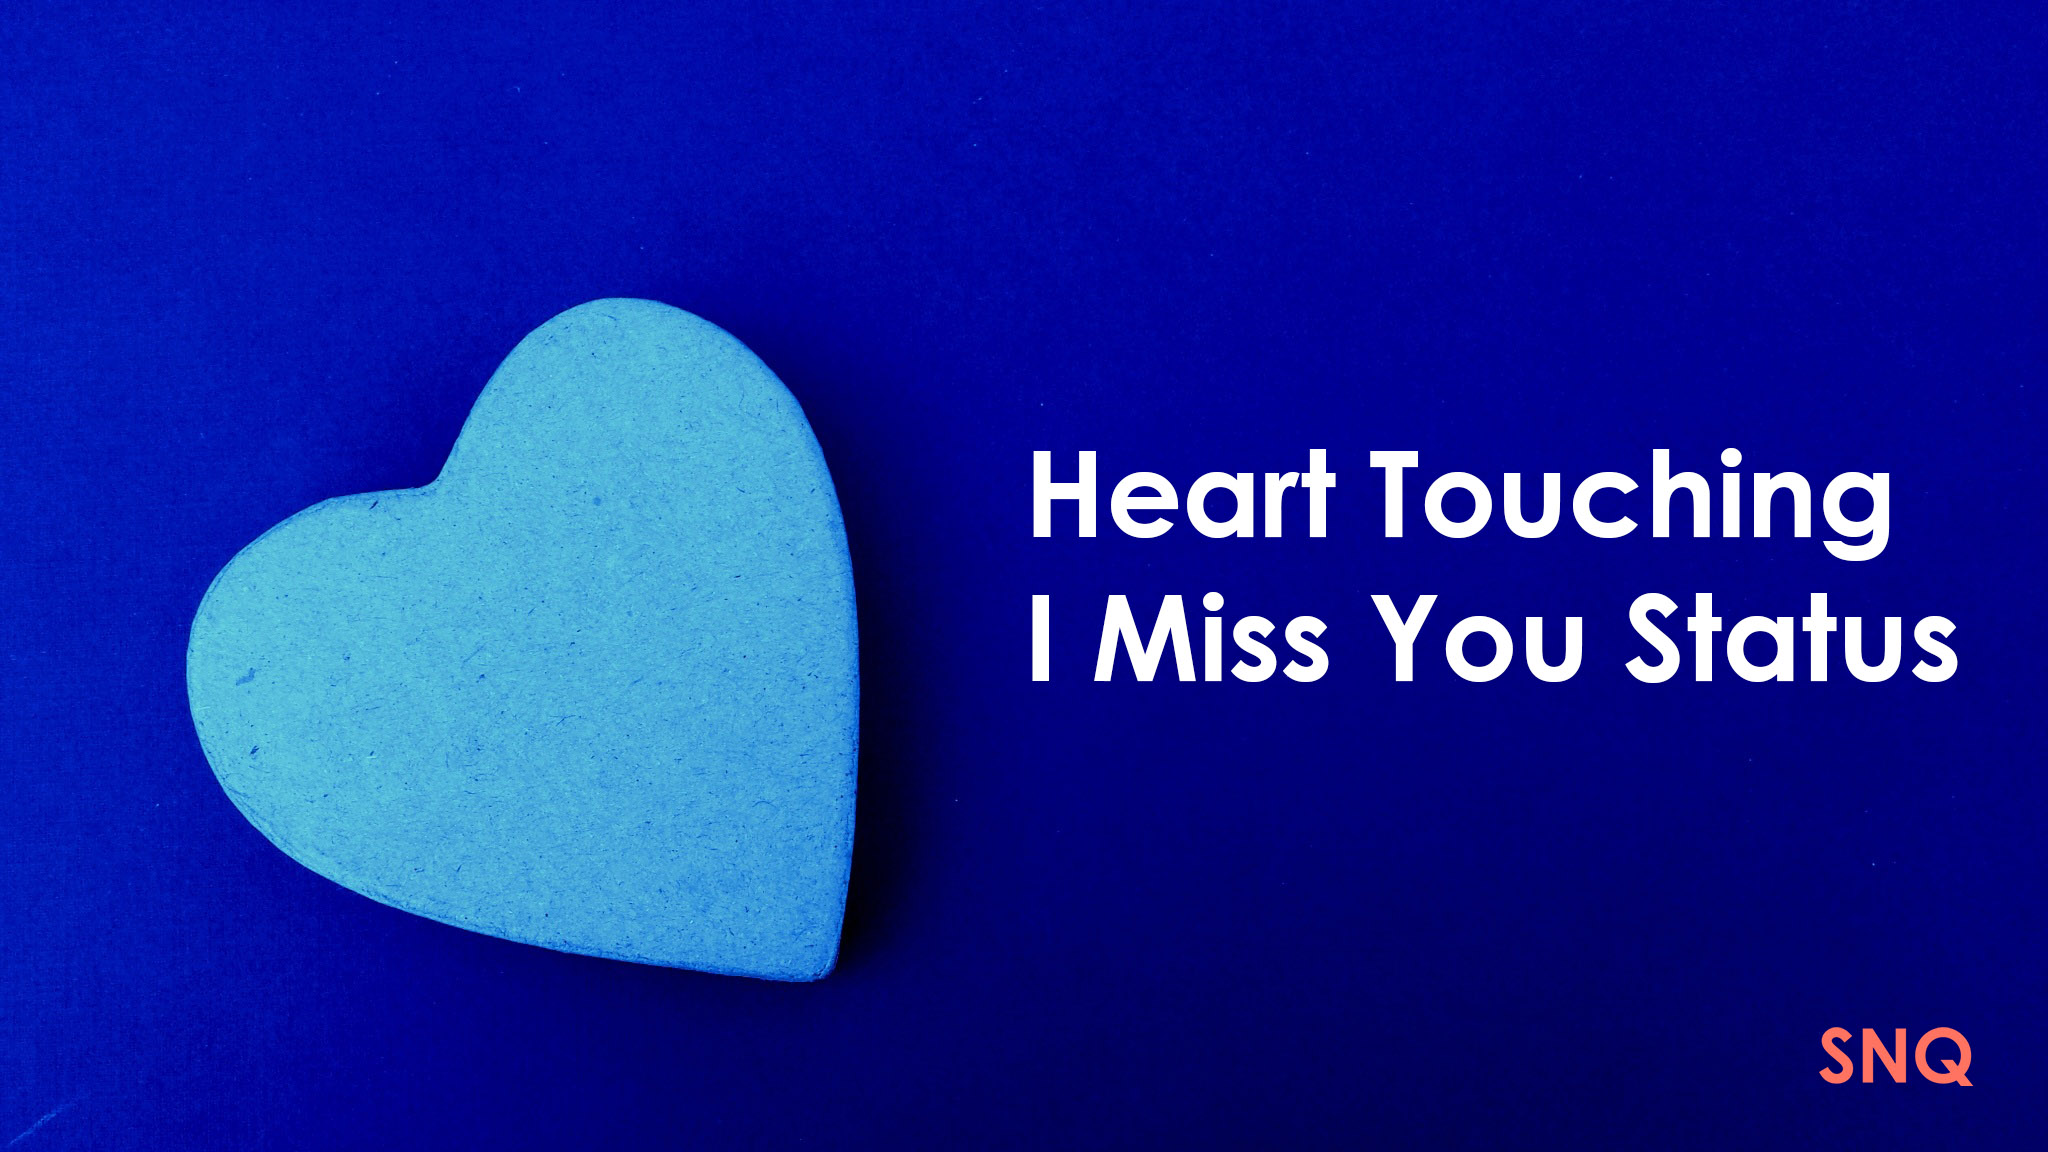 I Miss You Status - Miss You And Love You - HD Wallpaper 